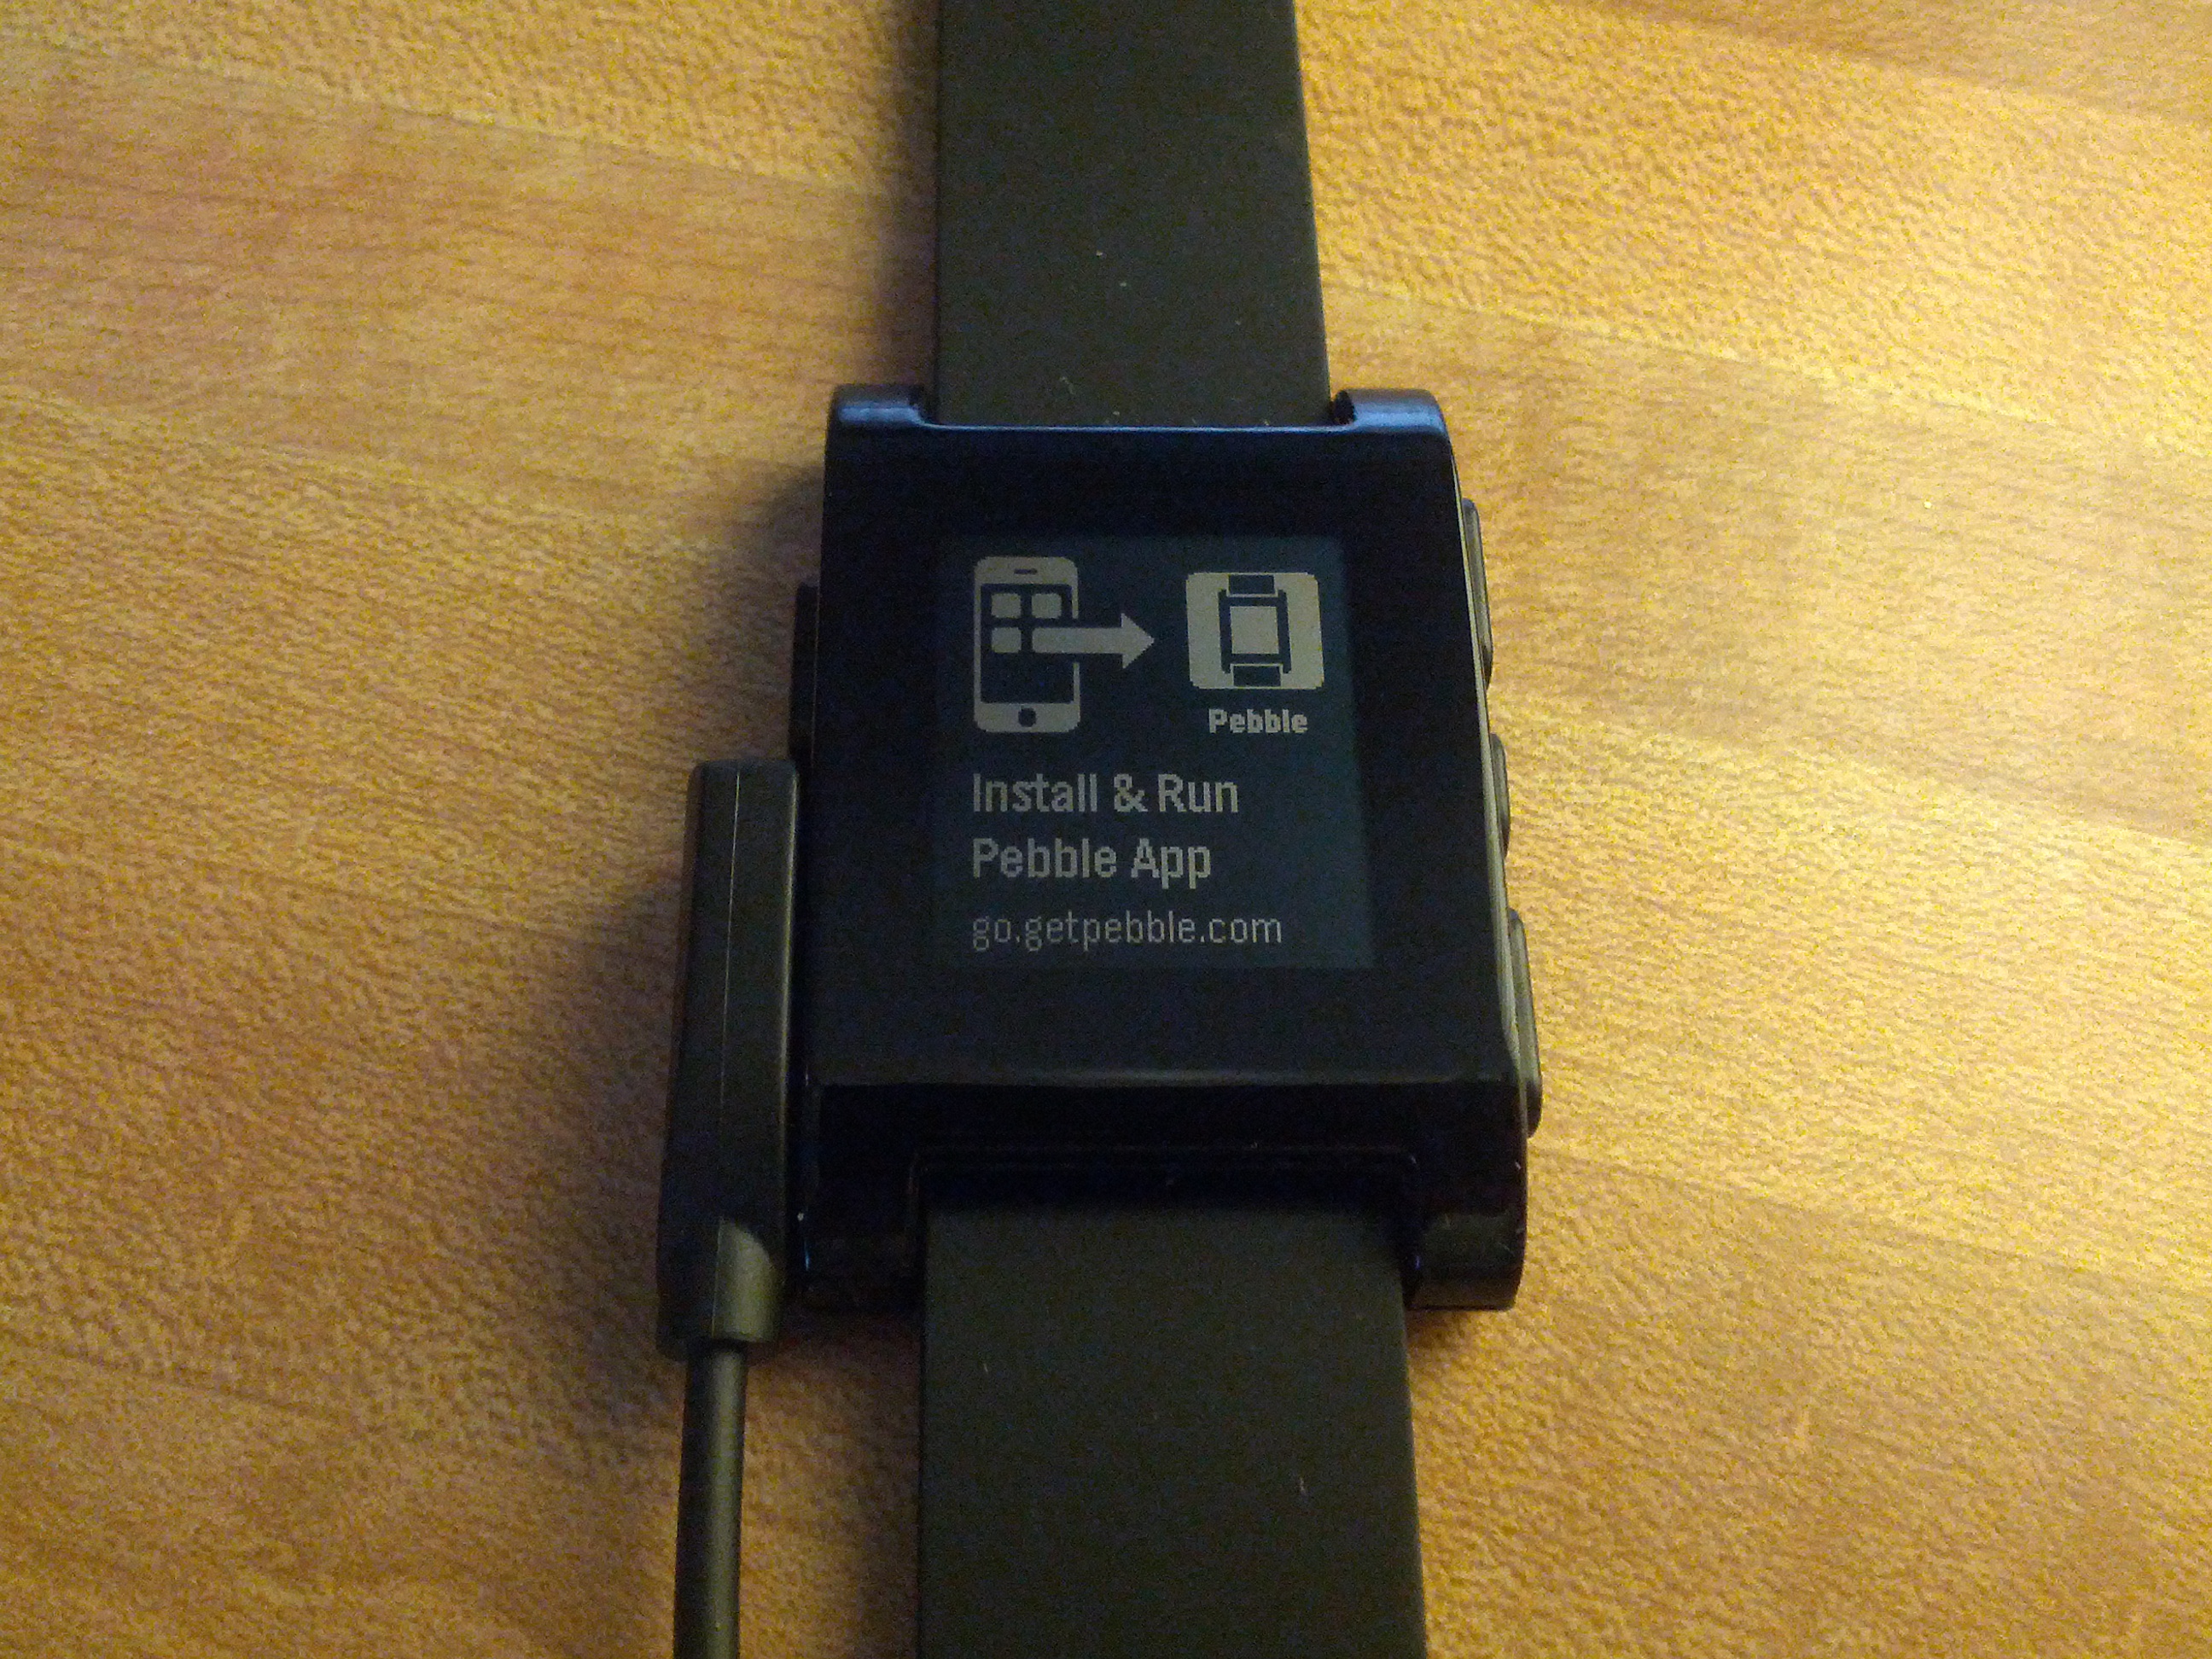 Pebble's screen the first time you power it up.